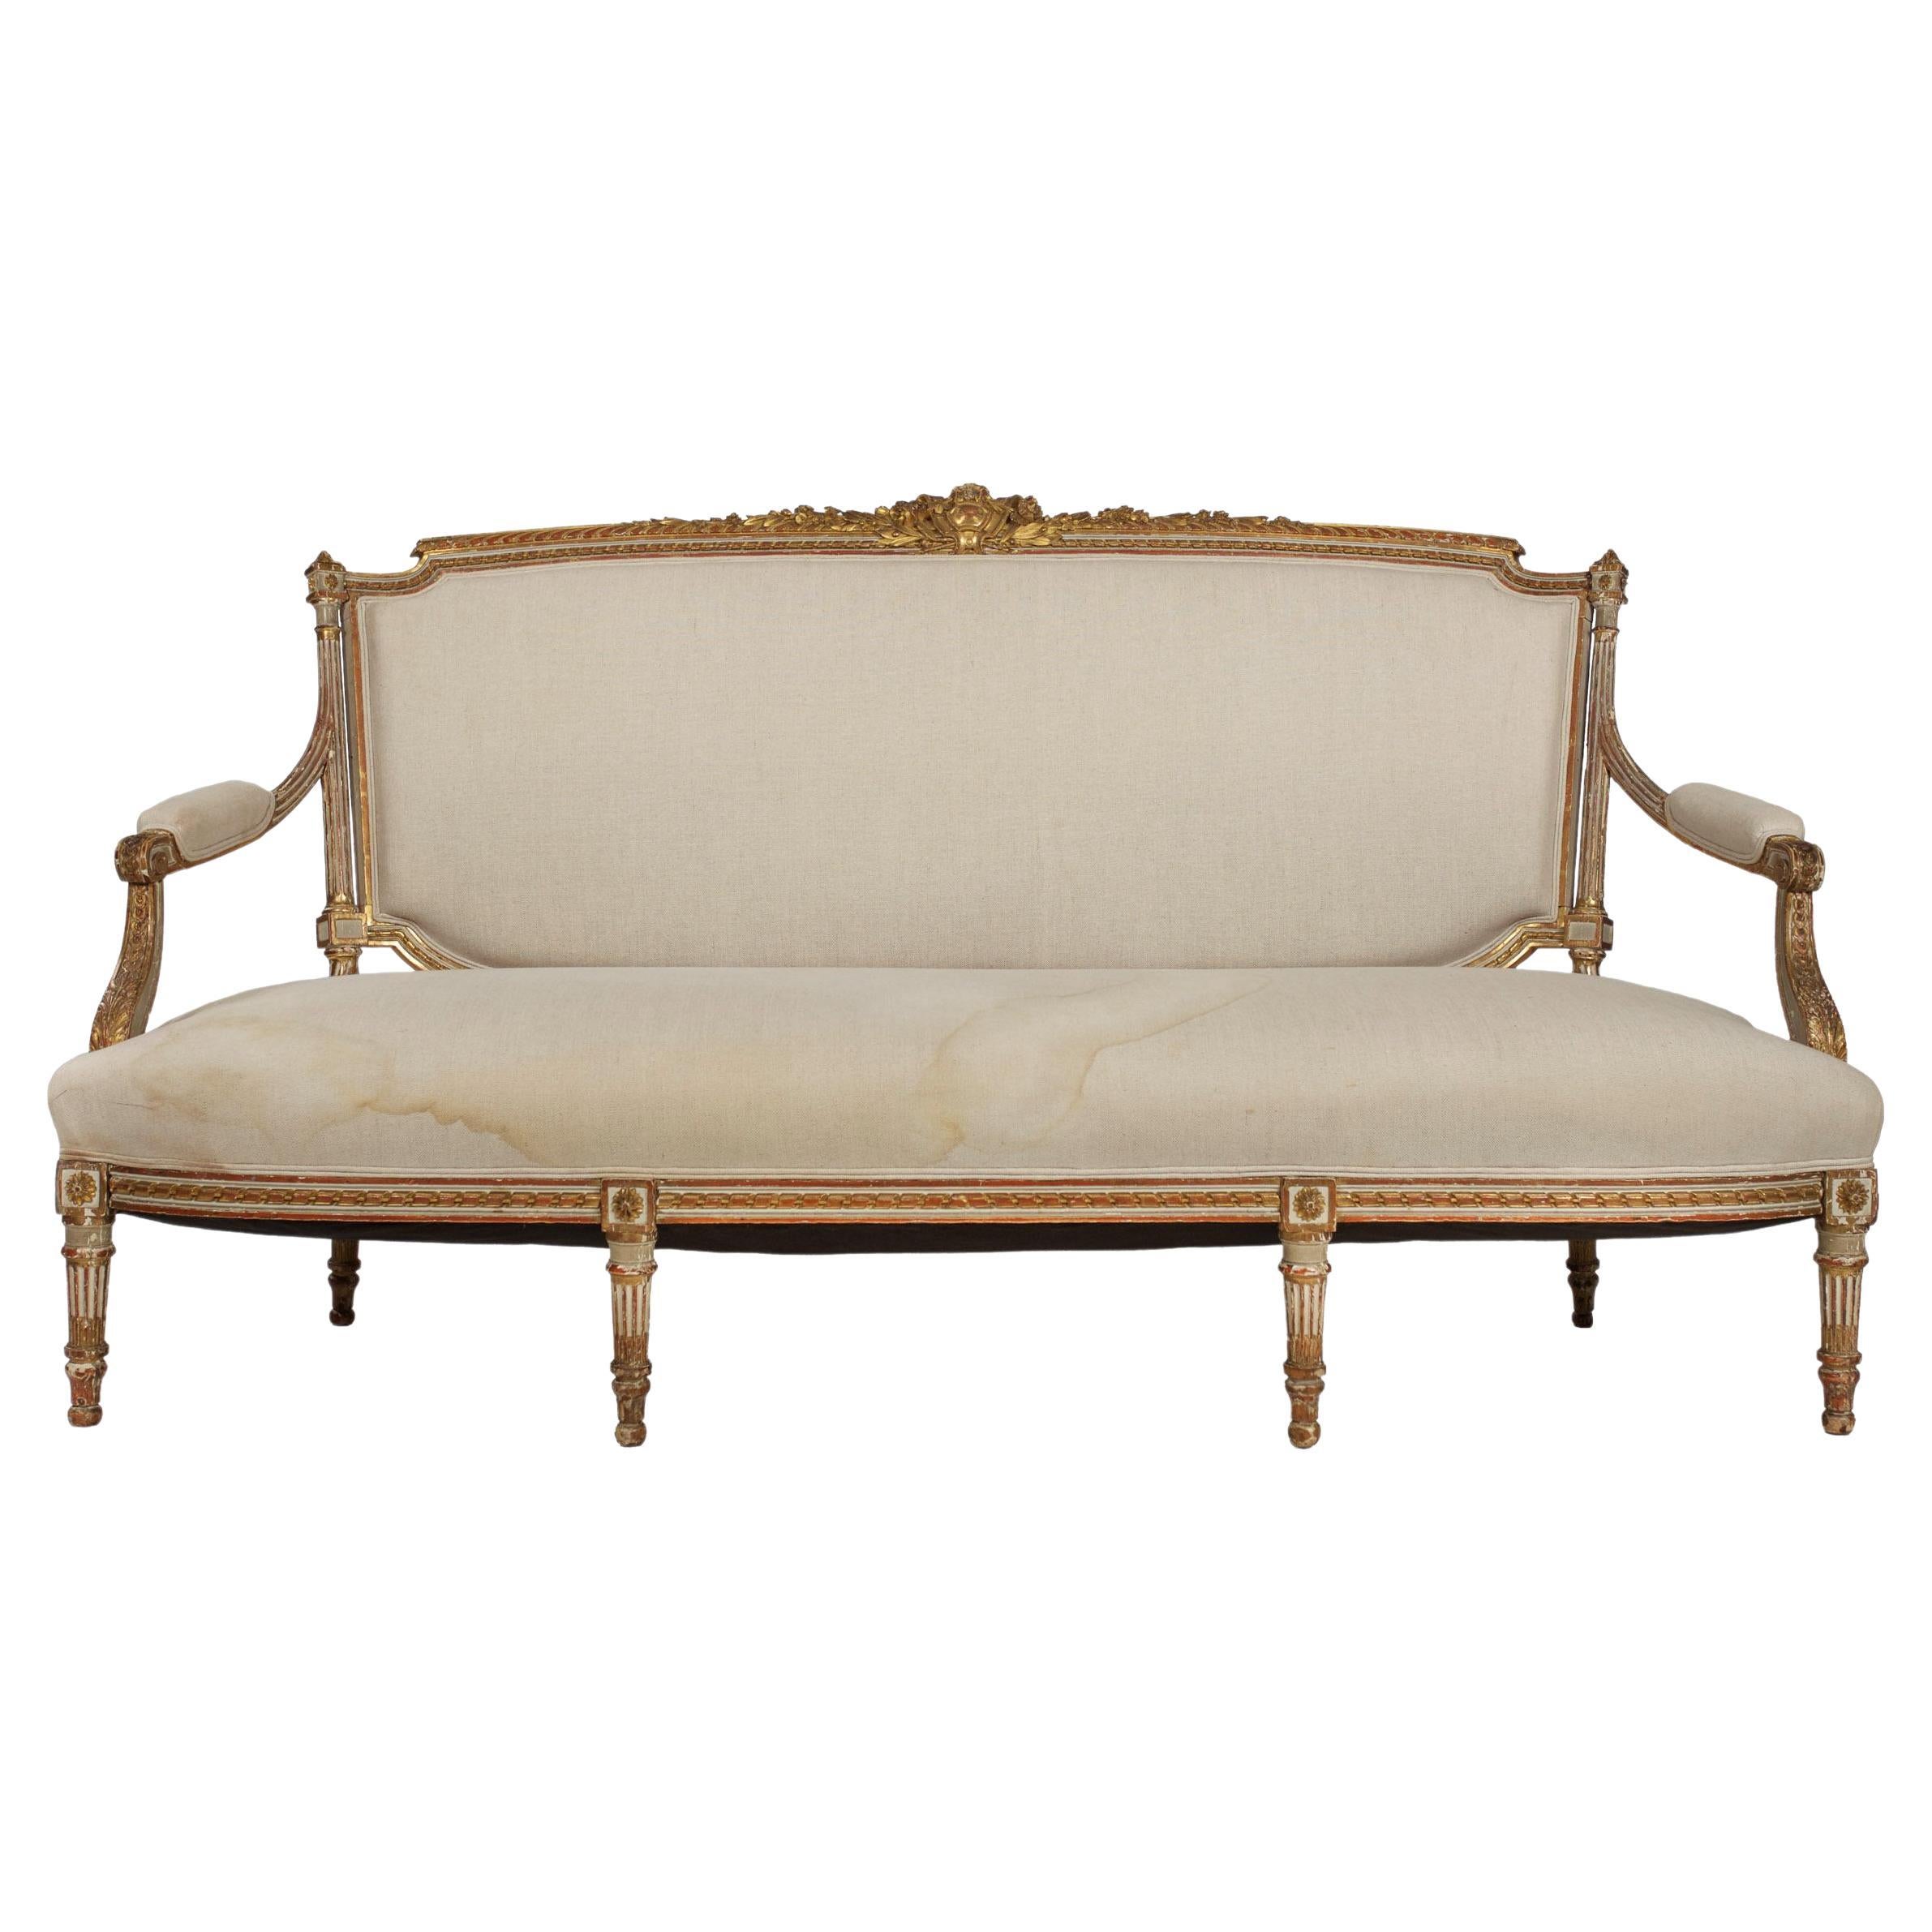 19th Century French Louis XVI Style Antique Painted Settee Sofa